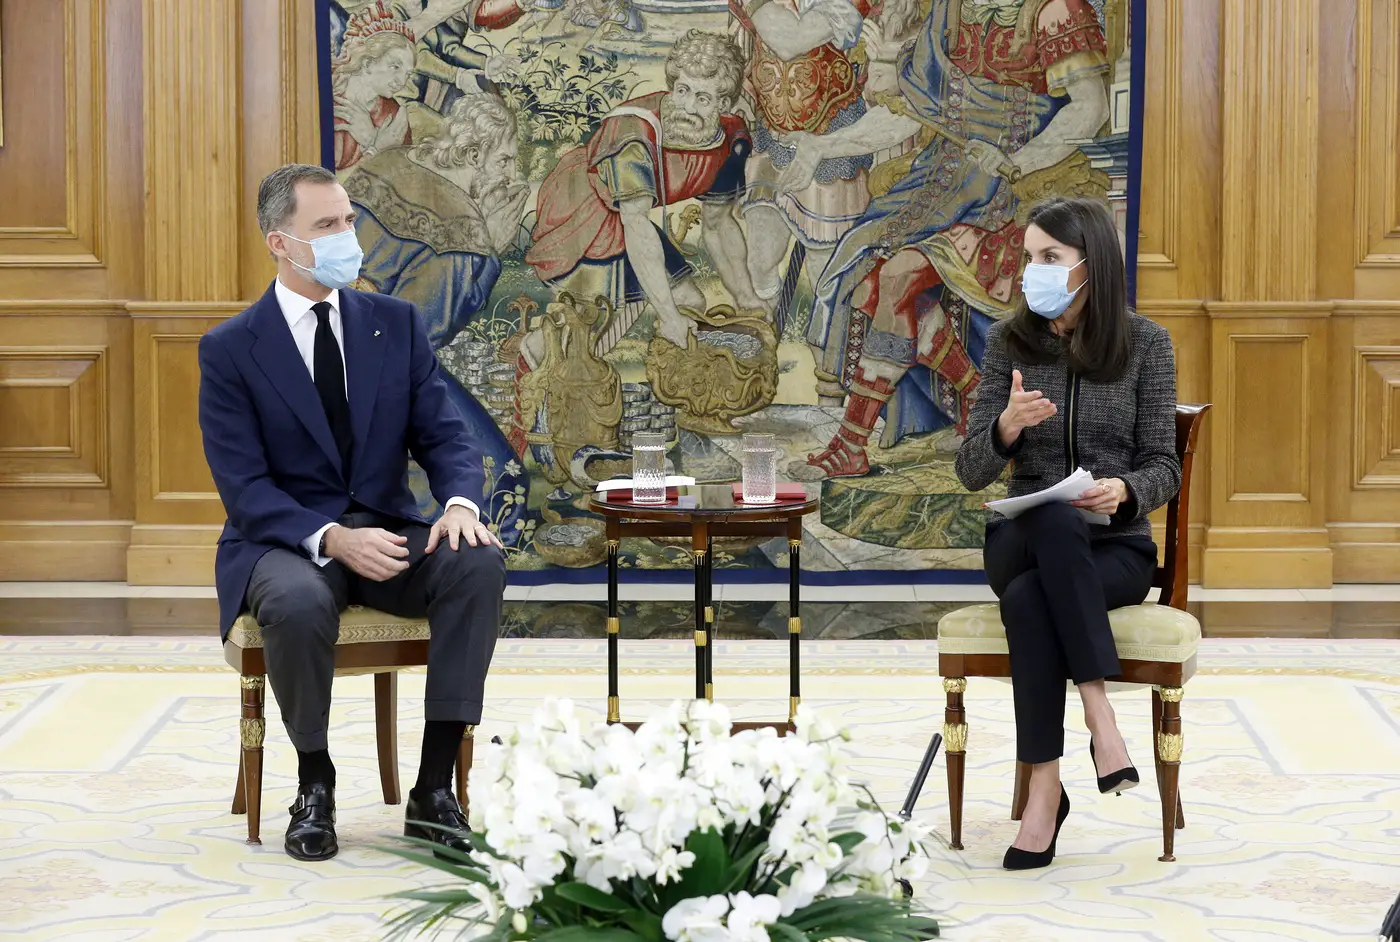 Don Felipe and Doña letizia at a time of the meeting held at the Palacio de La Zarzuela with young talents